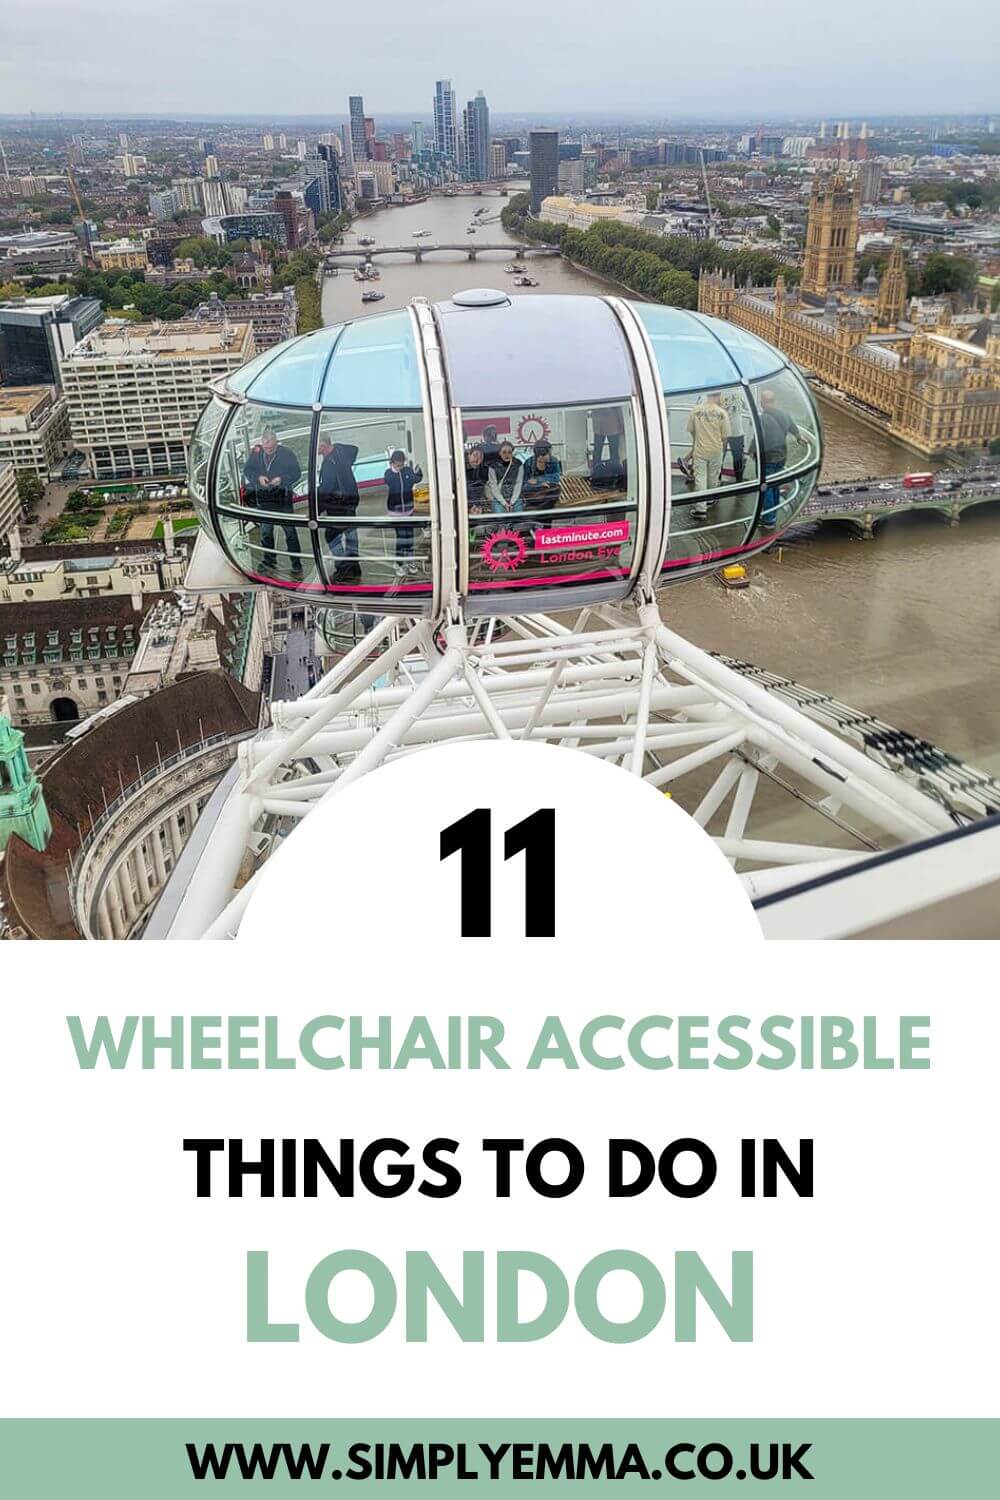 Pinterest image showing a view of the river Thames, Westminster and a pod from the top of the London Eye.. Text over the image reads "11 Wheelchair Accessible Things to Do in London"